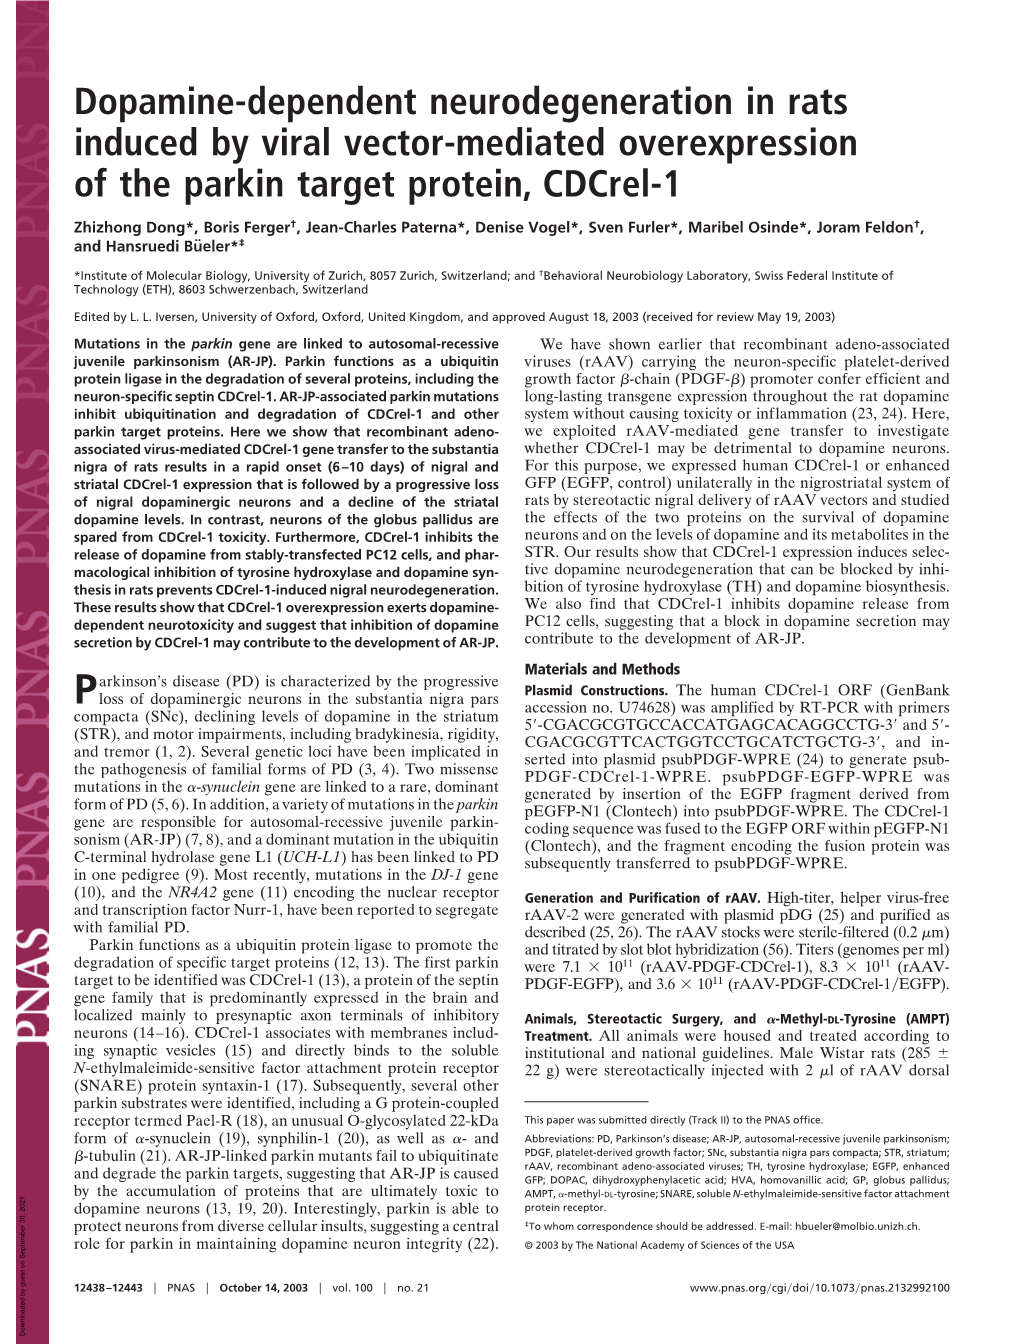 Dopamine-Dependent Neurodegeneration in Rats Induced by Viral Vector-Mediated Overexpression of the Parkin Target Protein, Cdcrel-1